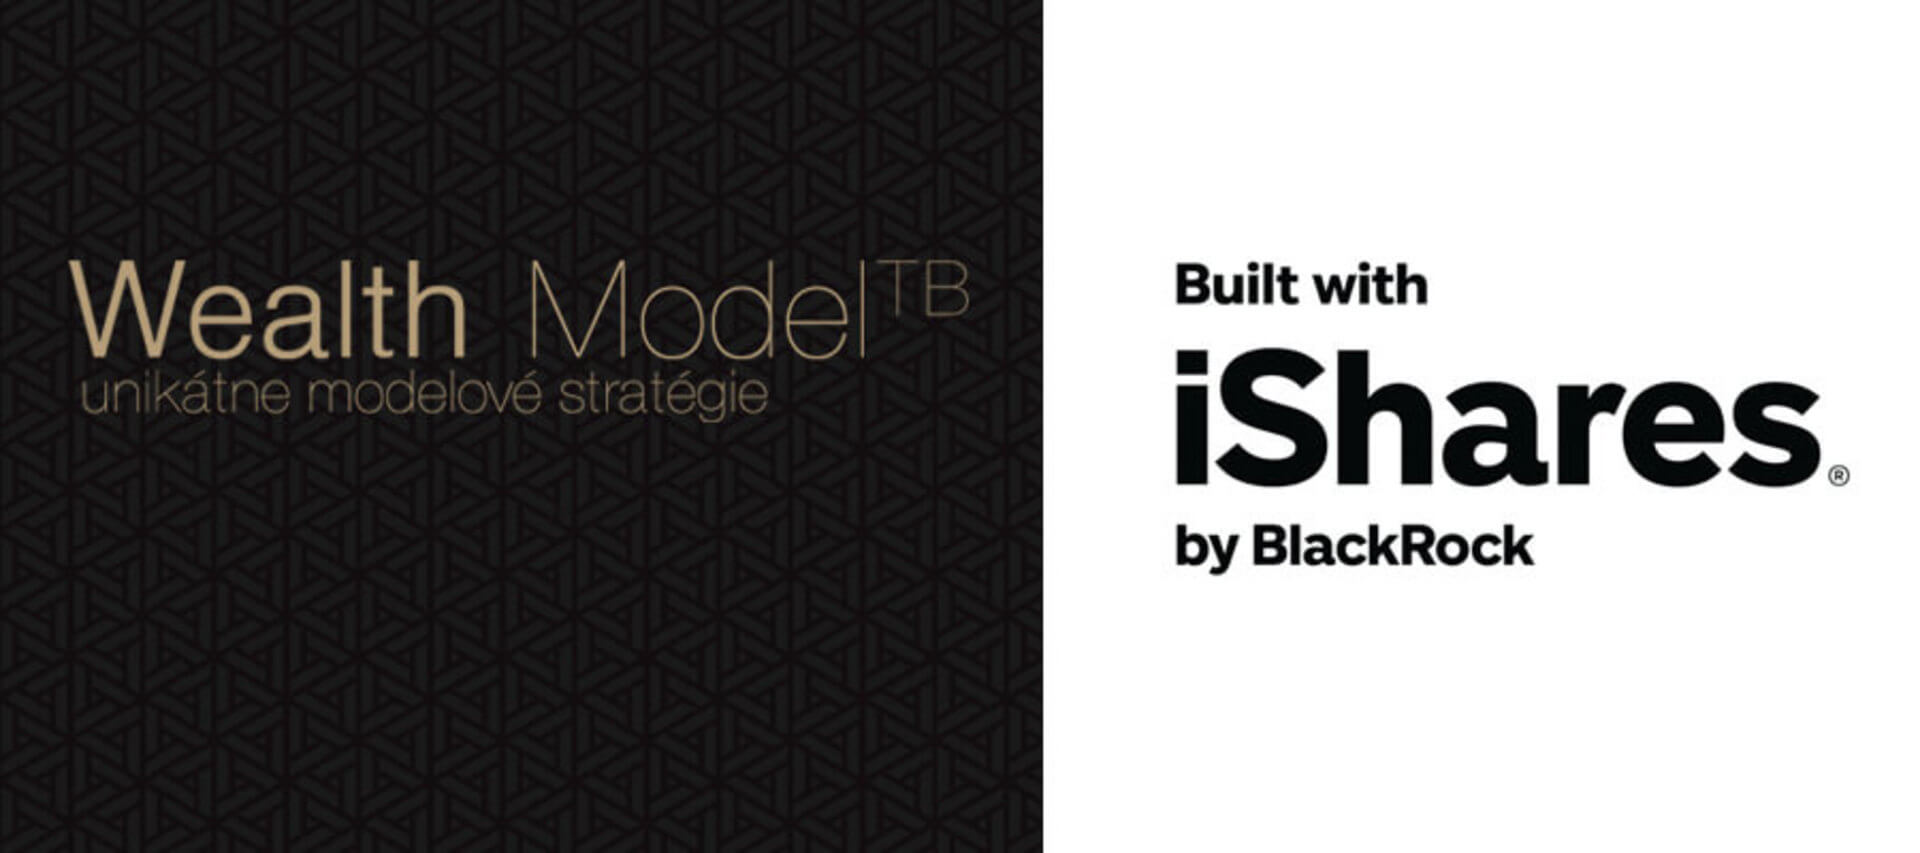 <b>Private</b> banking<sup>TB</sup> introduces exclusive model portfolios consisted solely from ETF funds. Built with iShares® by BlackRock, the world´s largest ETF asset manager